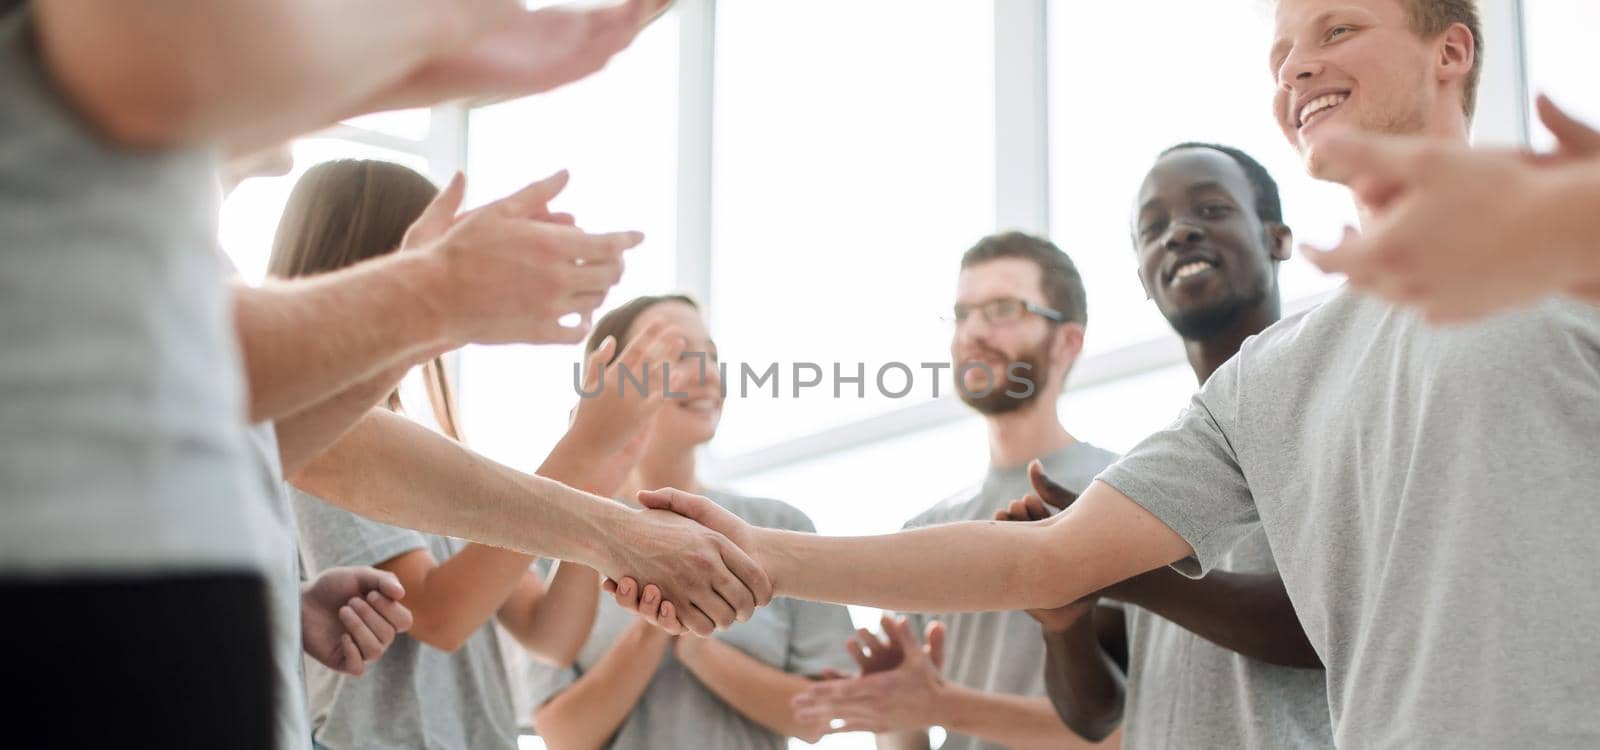 young people shaking hands, standing in a circle of friends. by asdf